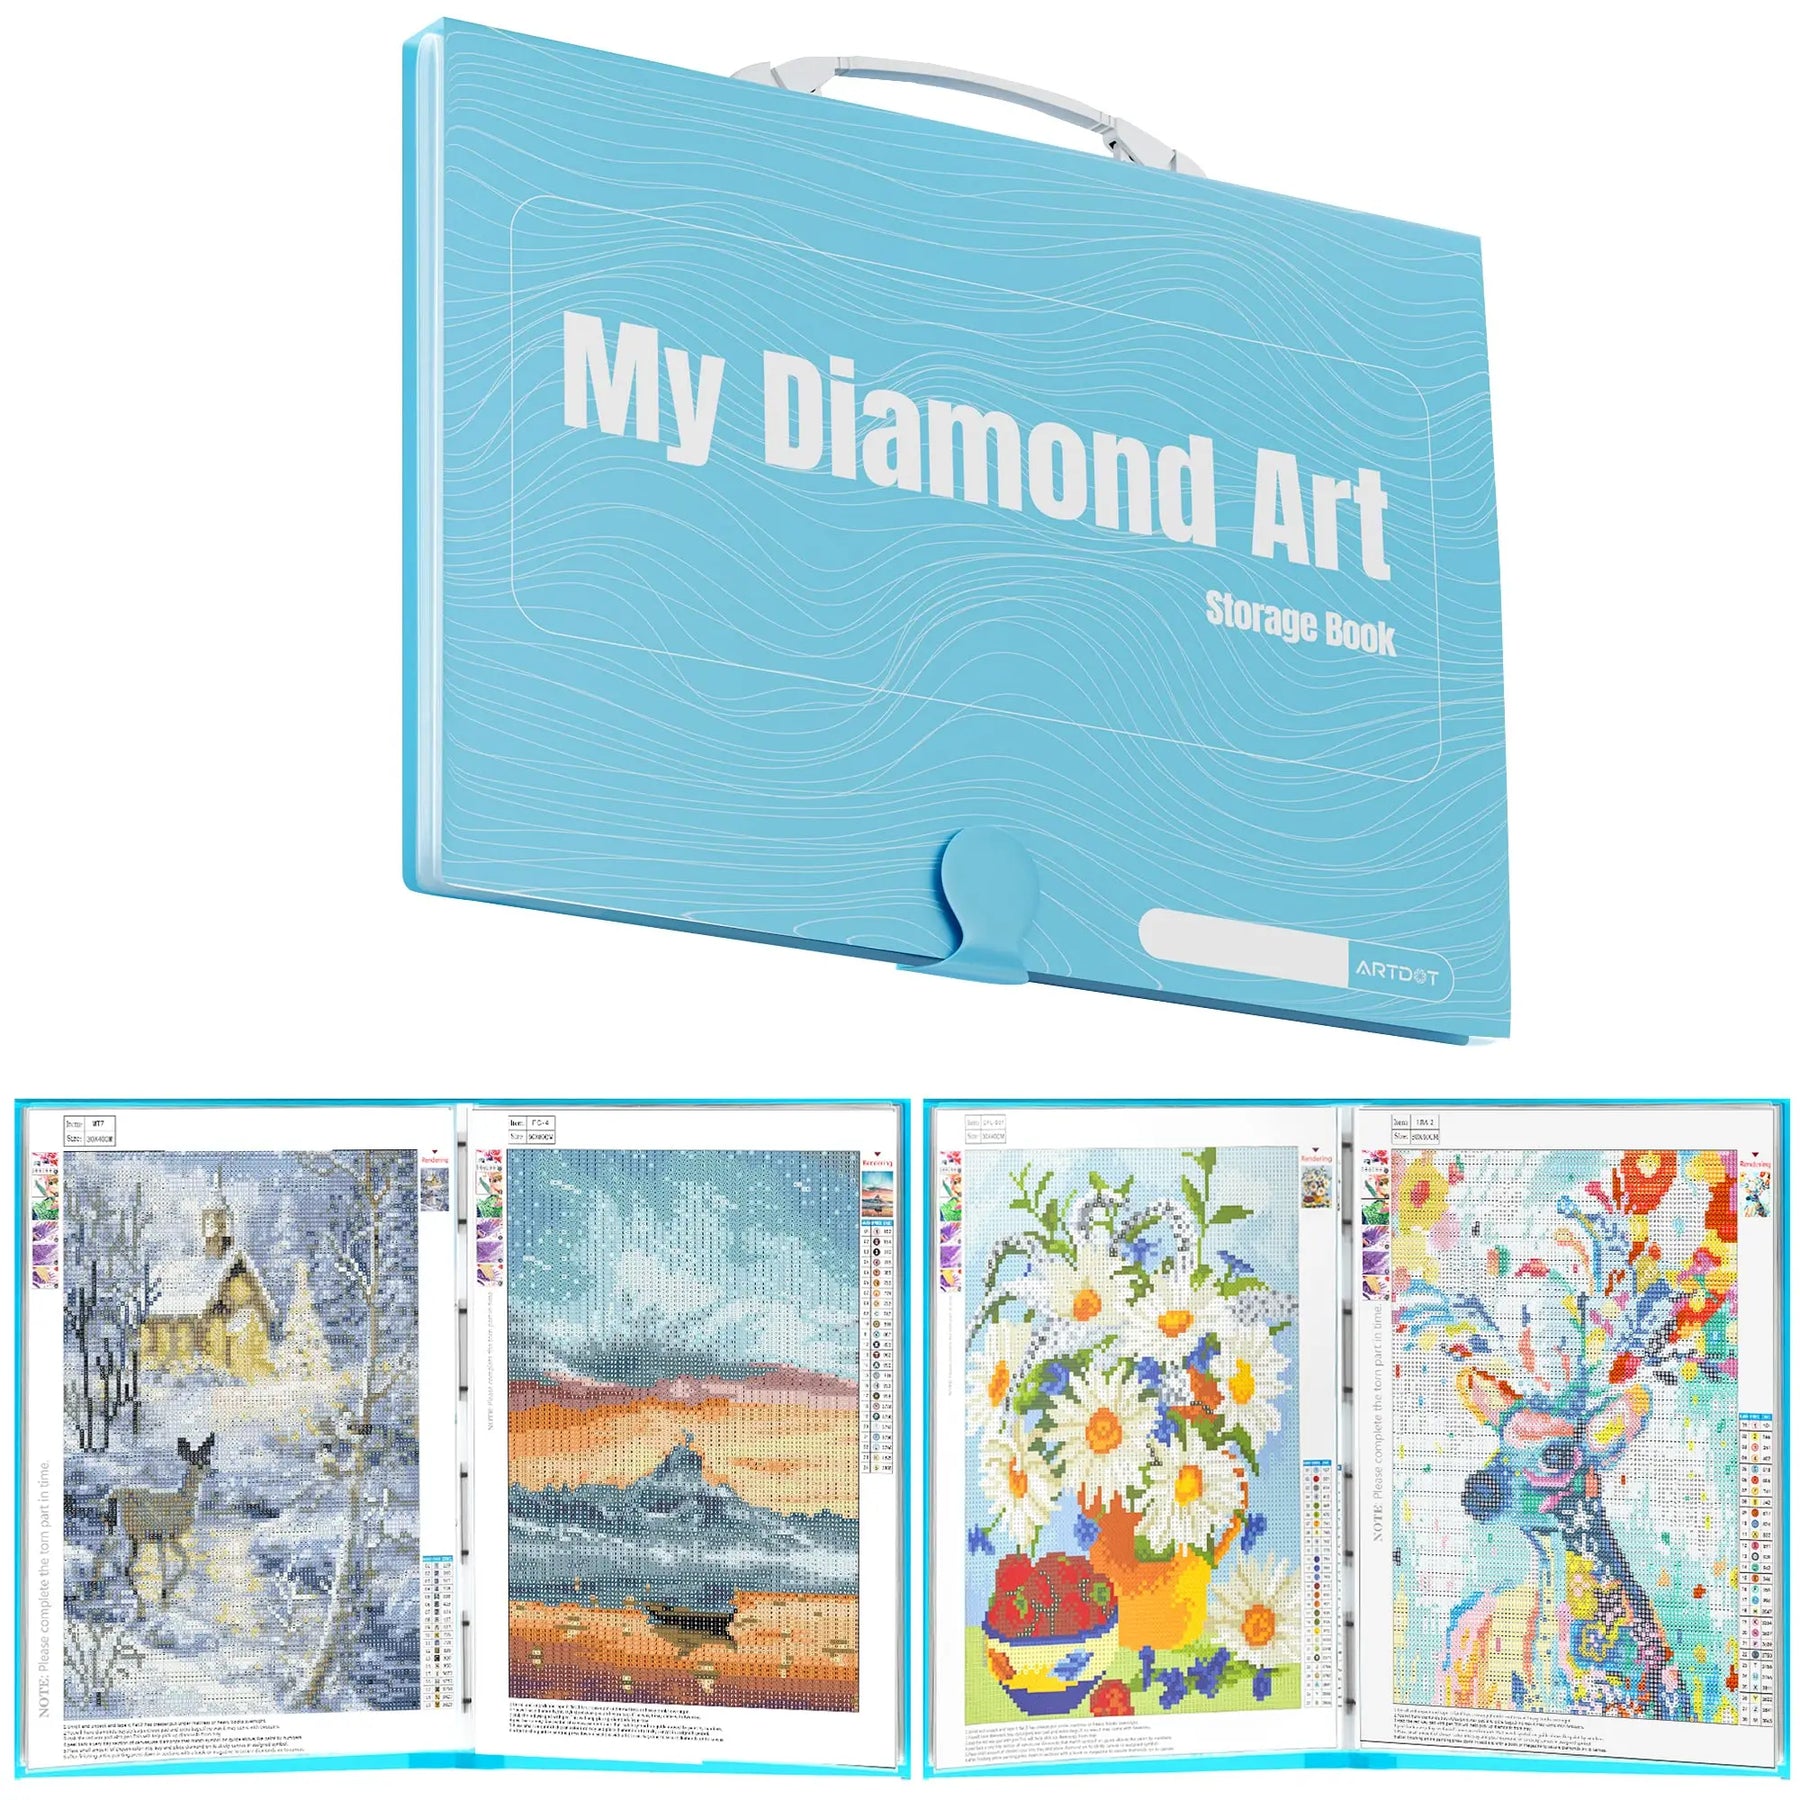 Diamond Painting 30 Pages Storage Presentation Book (Suitable for